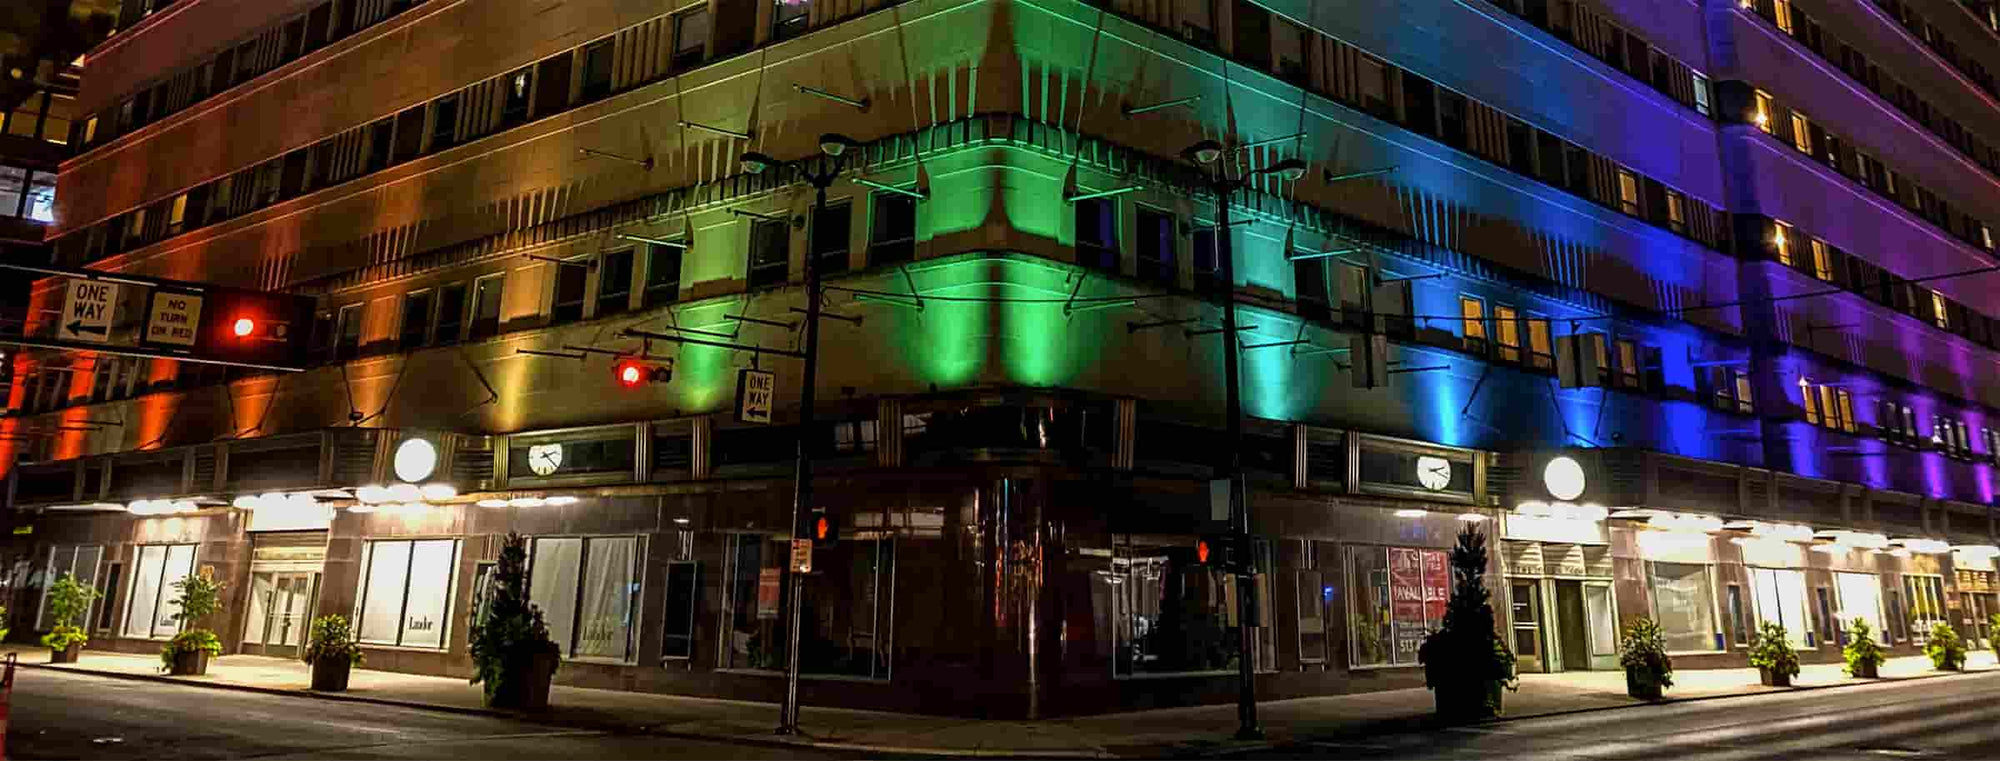 color commercial outdoor lighting on a building in downtown Cincinnati in rainbow colors